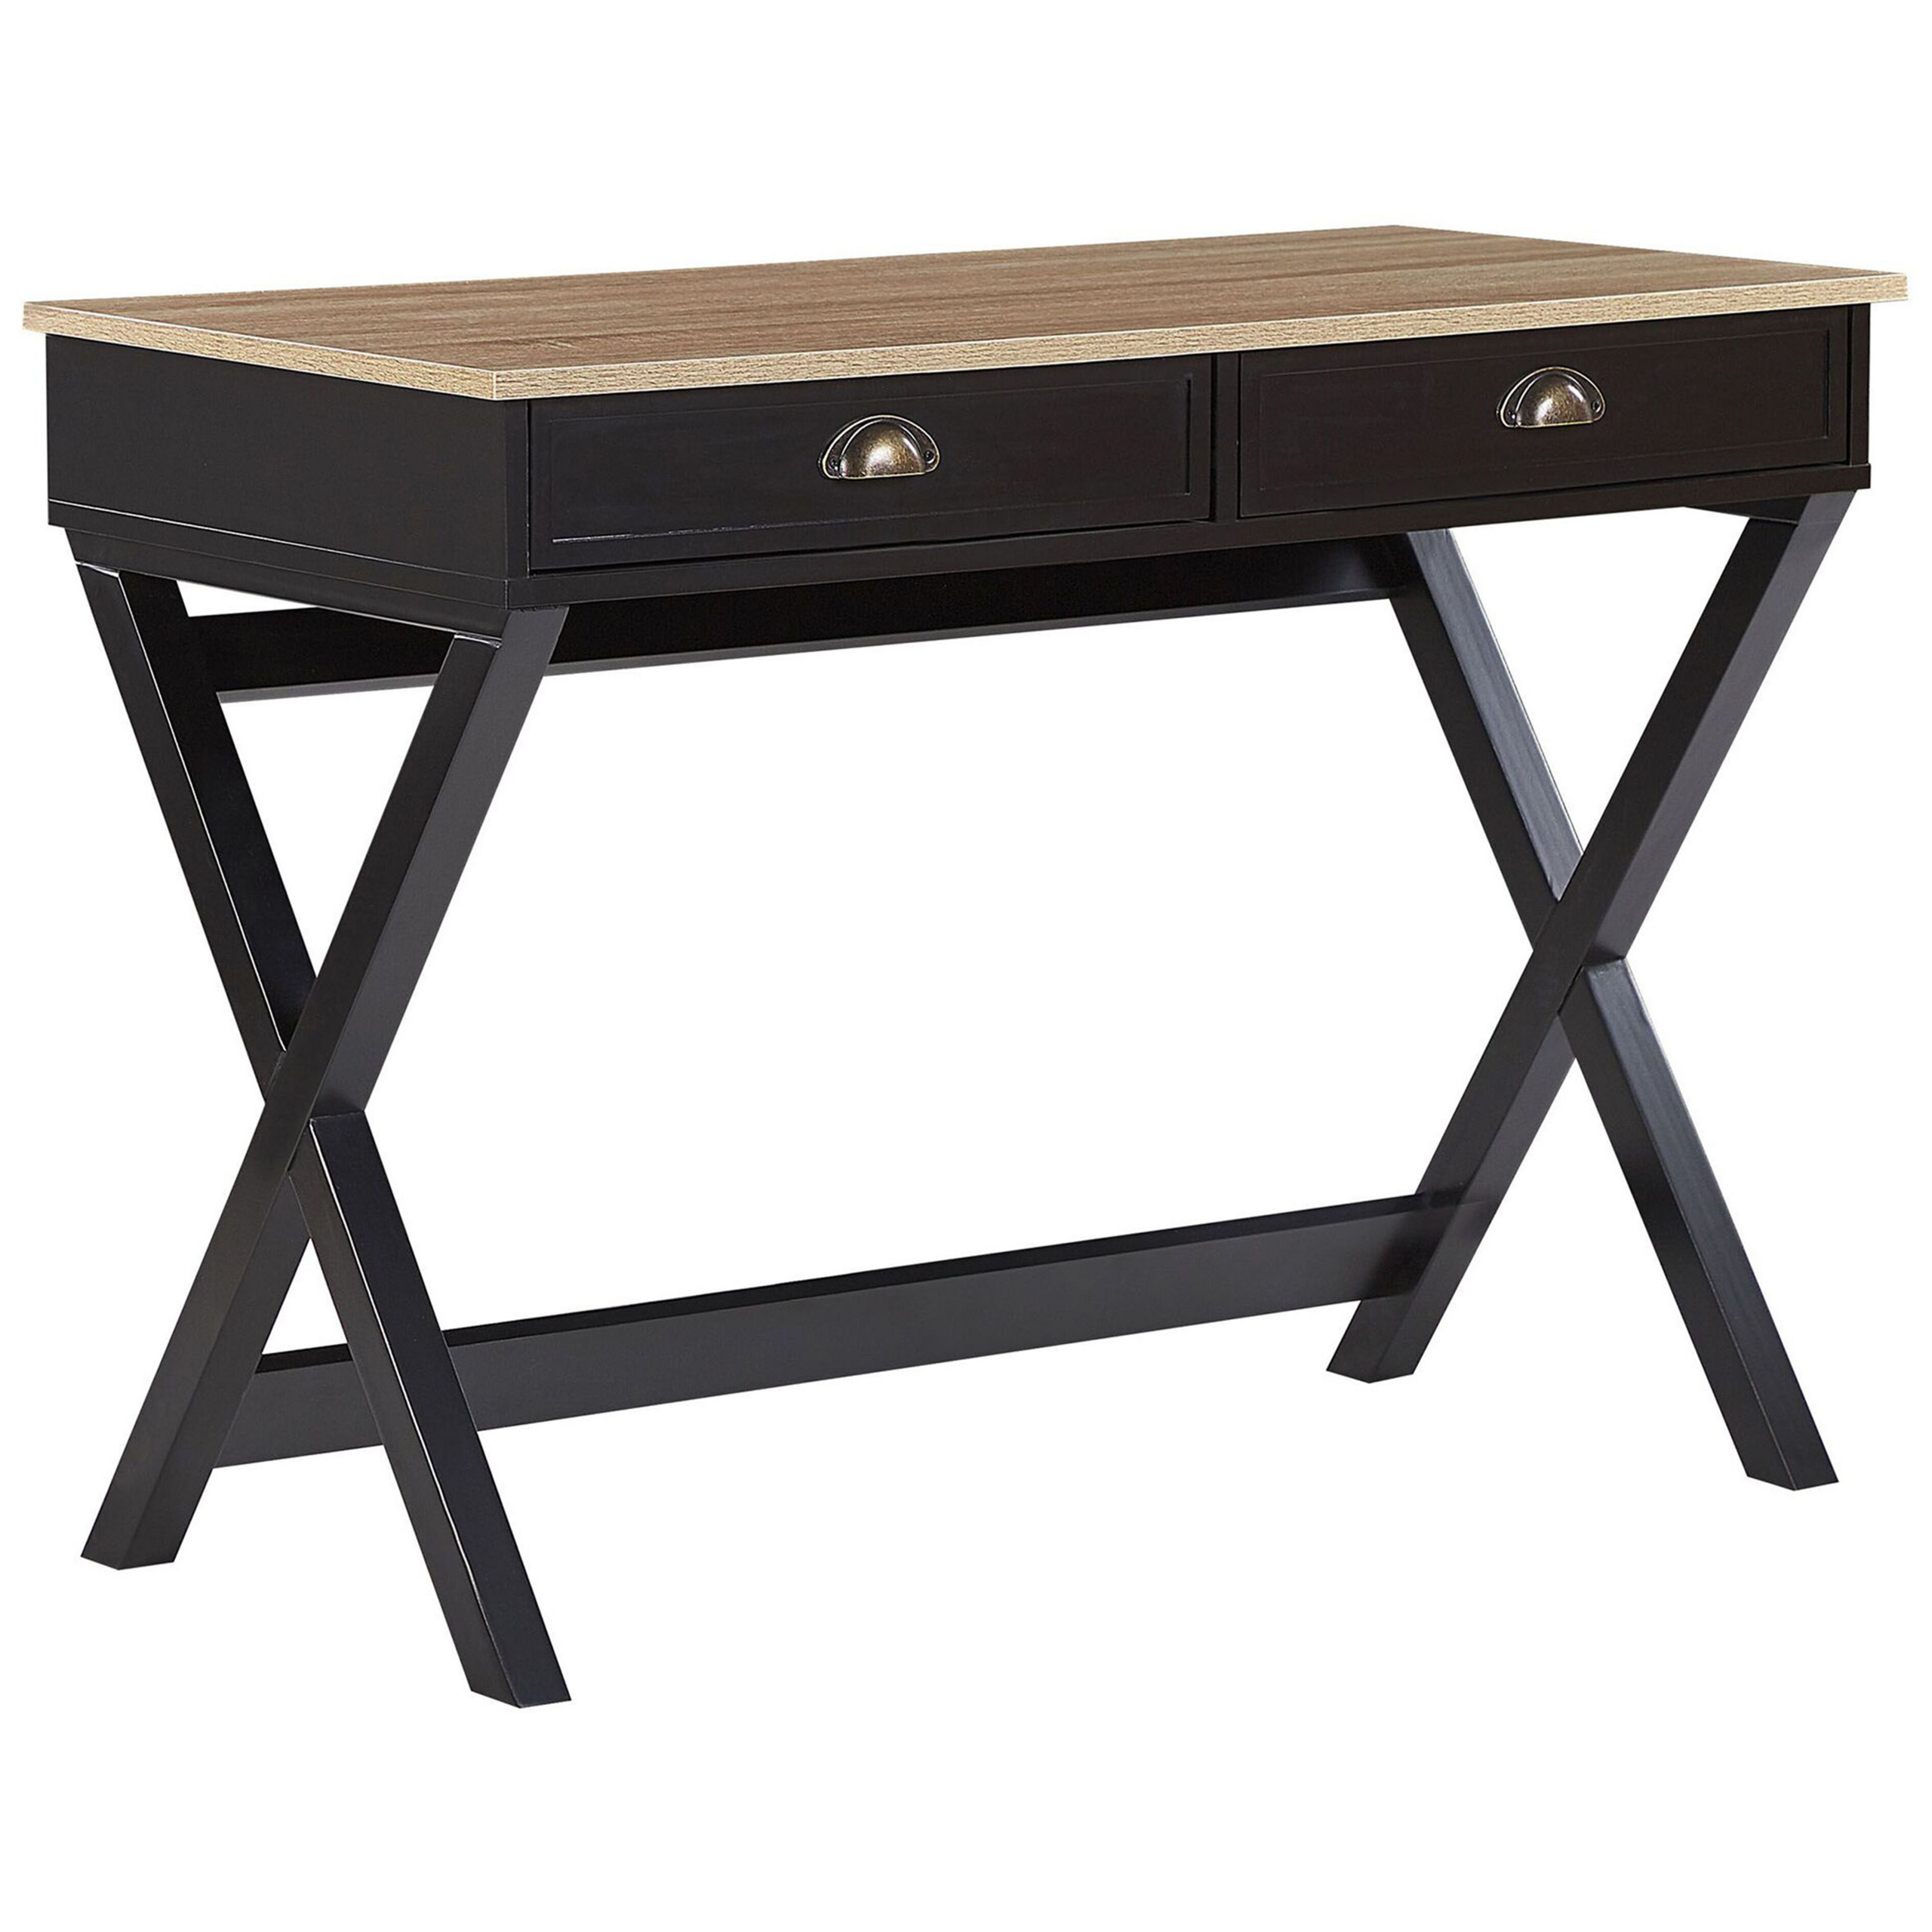 Beliani Home Office Desk Black and Light Wood 103 x 50 cm with Drawers Cross Legs